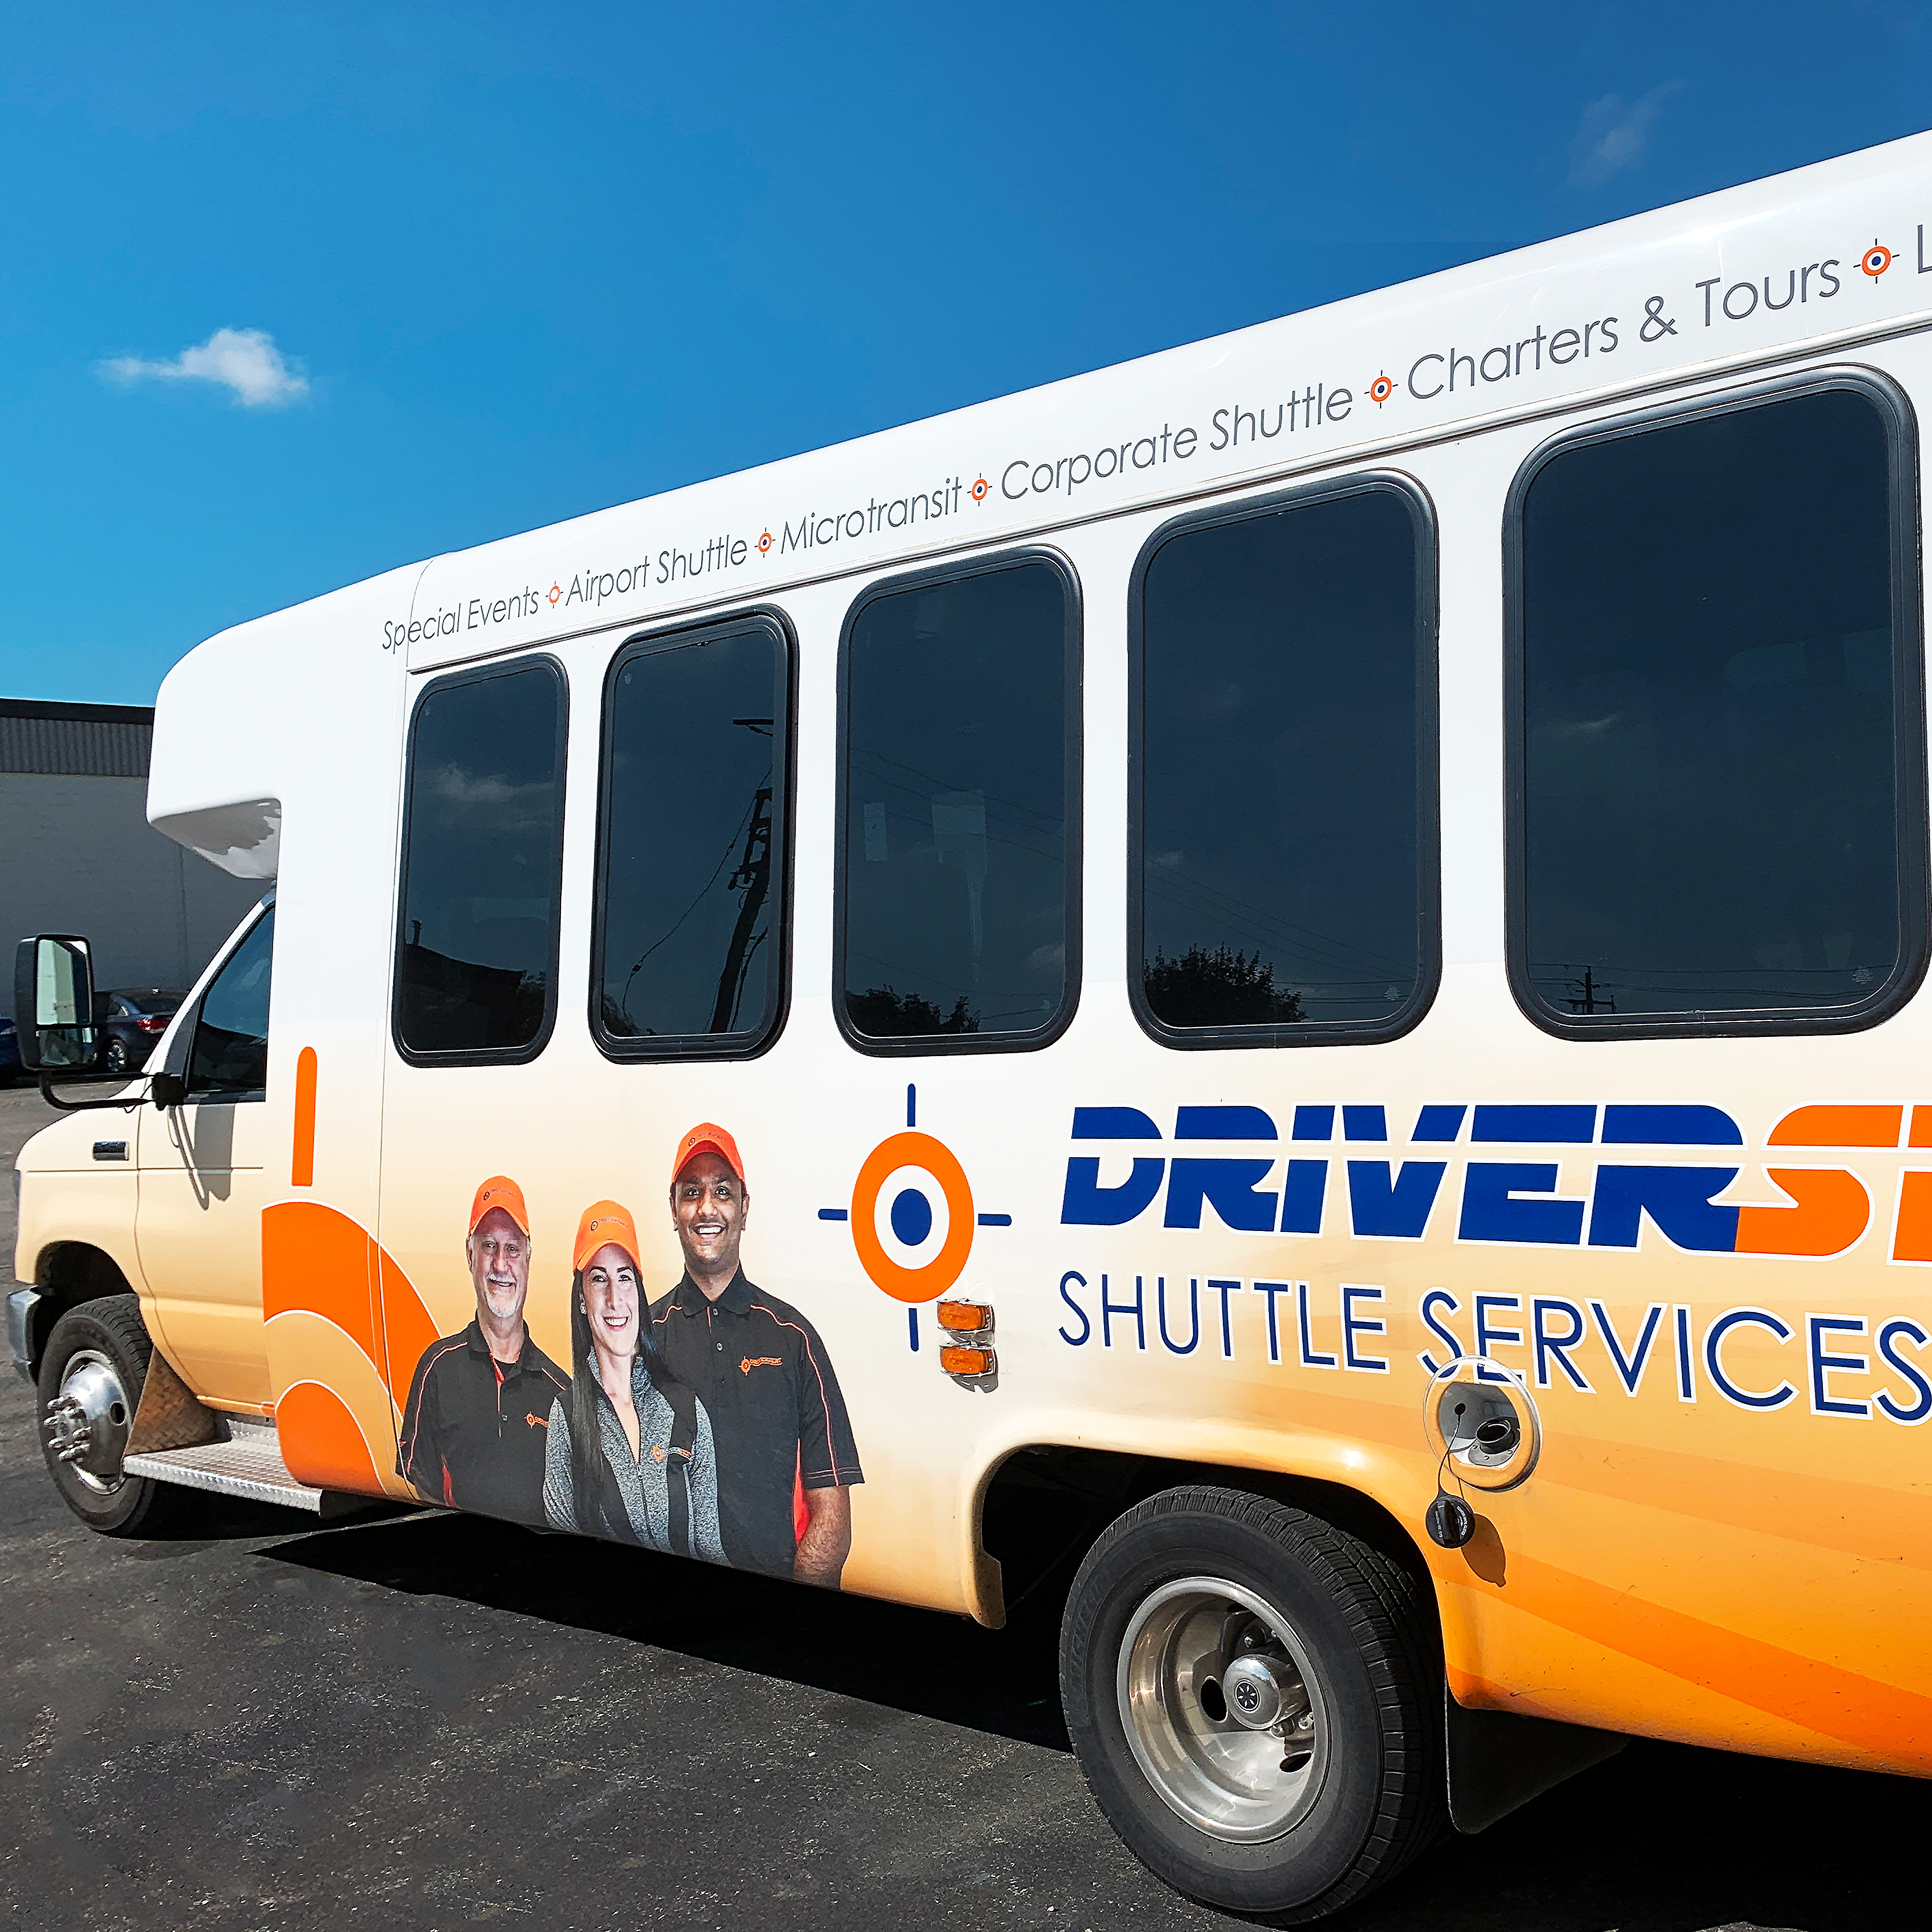 Driverseat’s Shuttle Service is Growing by 100%